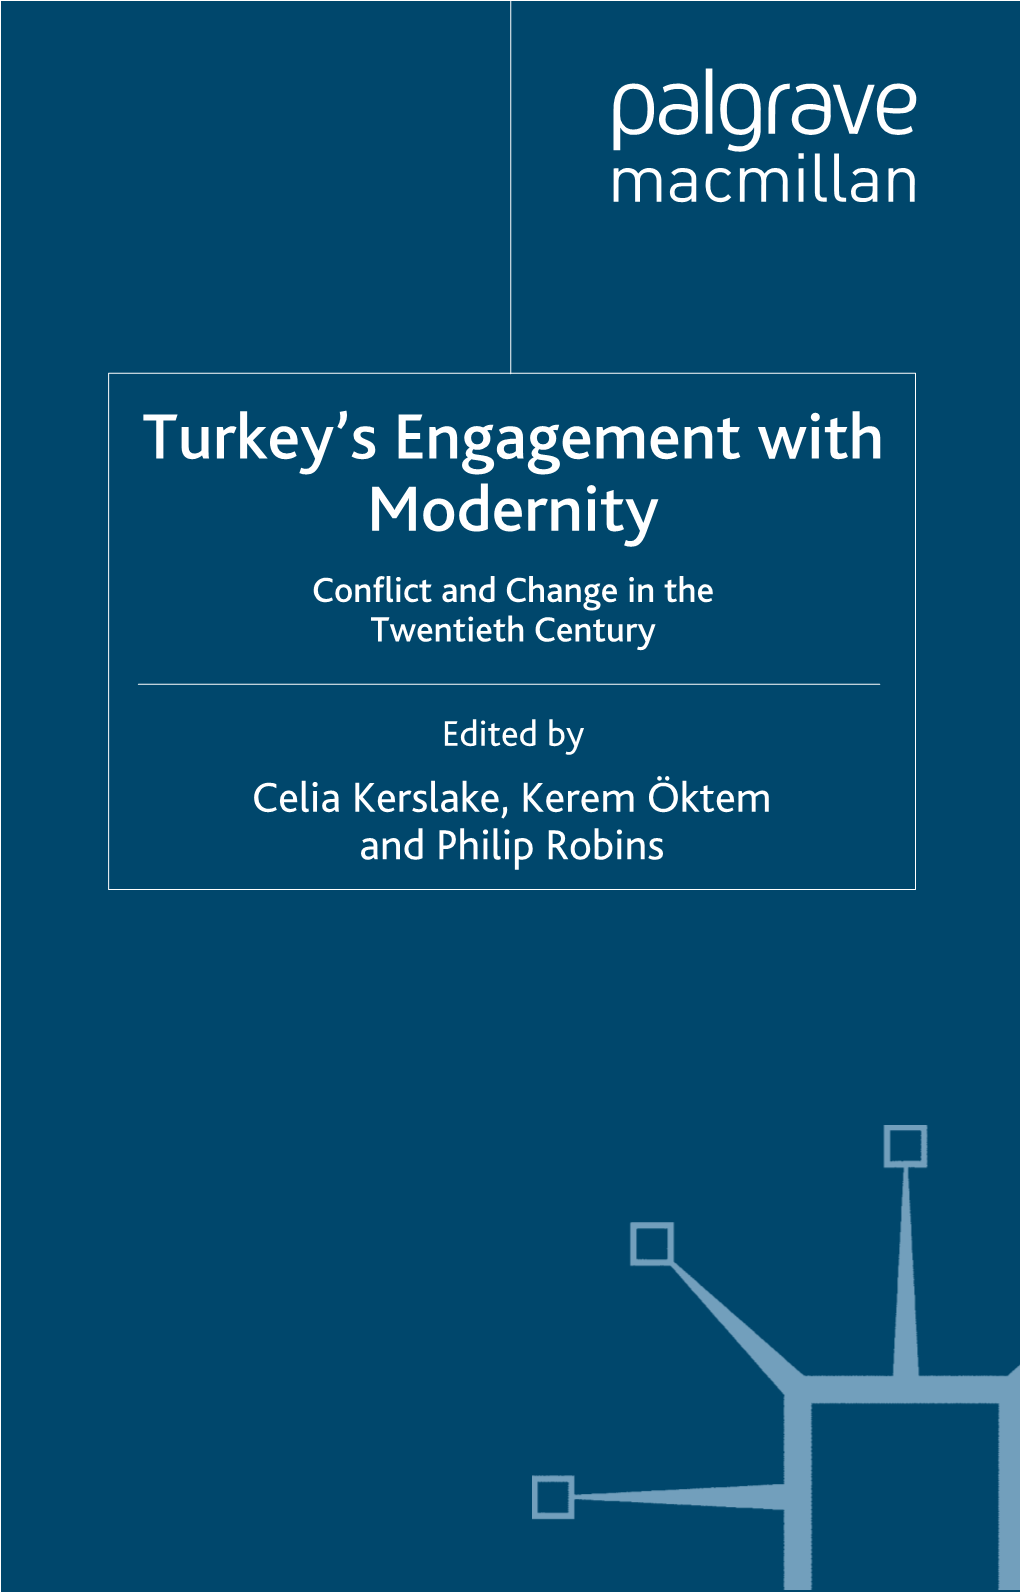 Turkey's Engagement with Modernity, Edited by Celia J